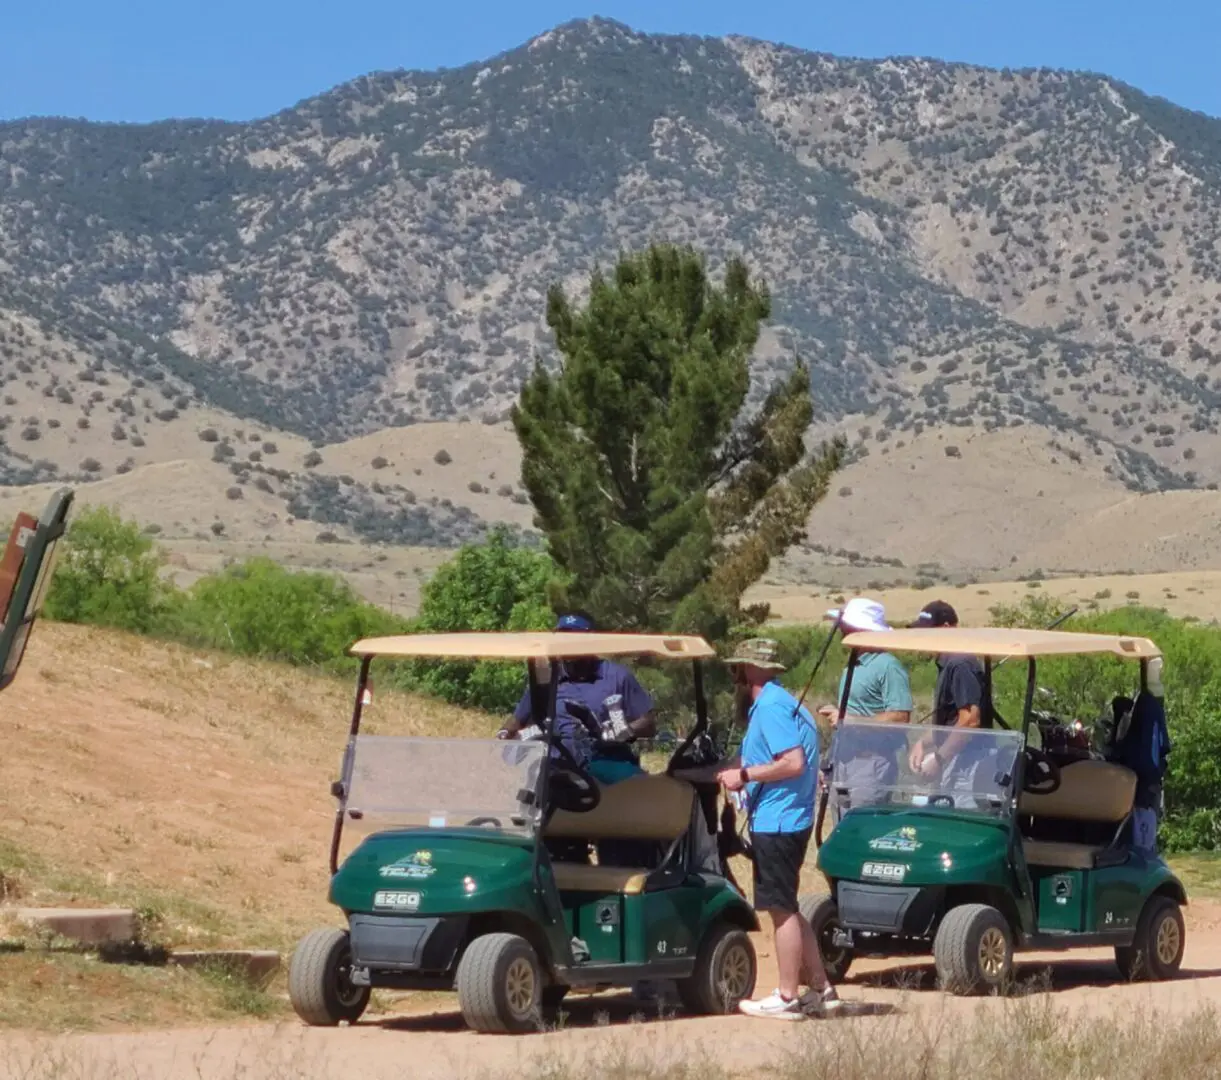 A group of people riding in golf carts on the side of a road.